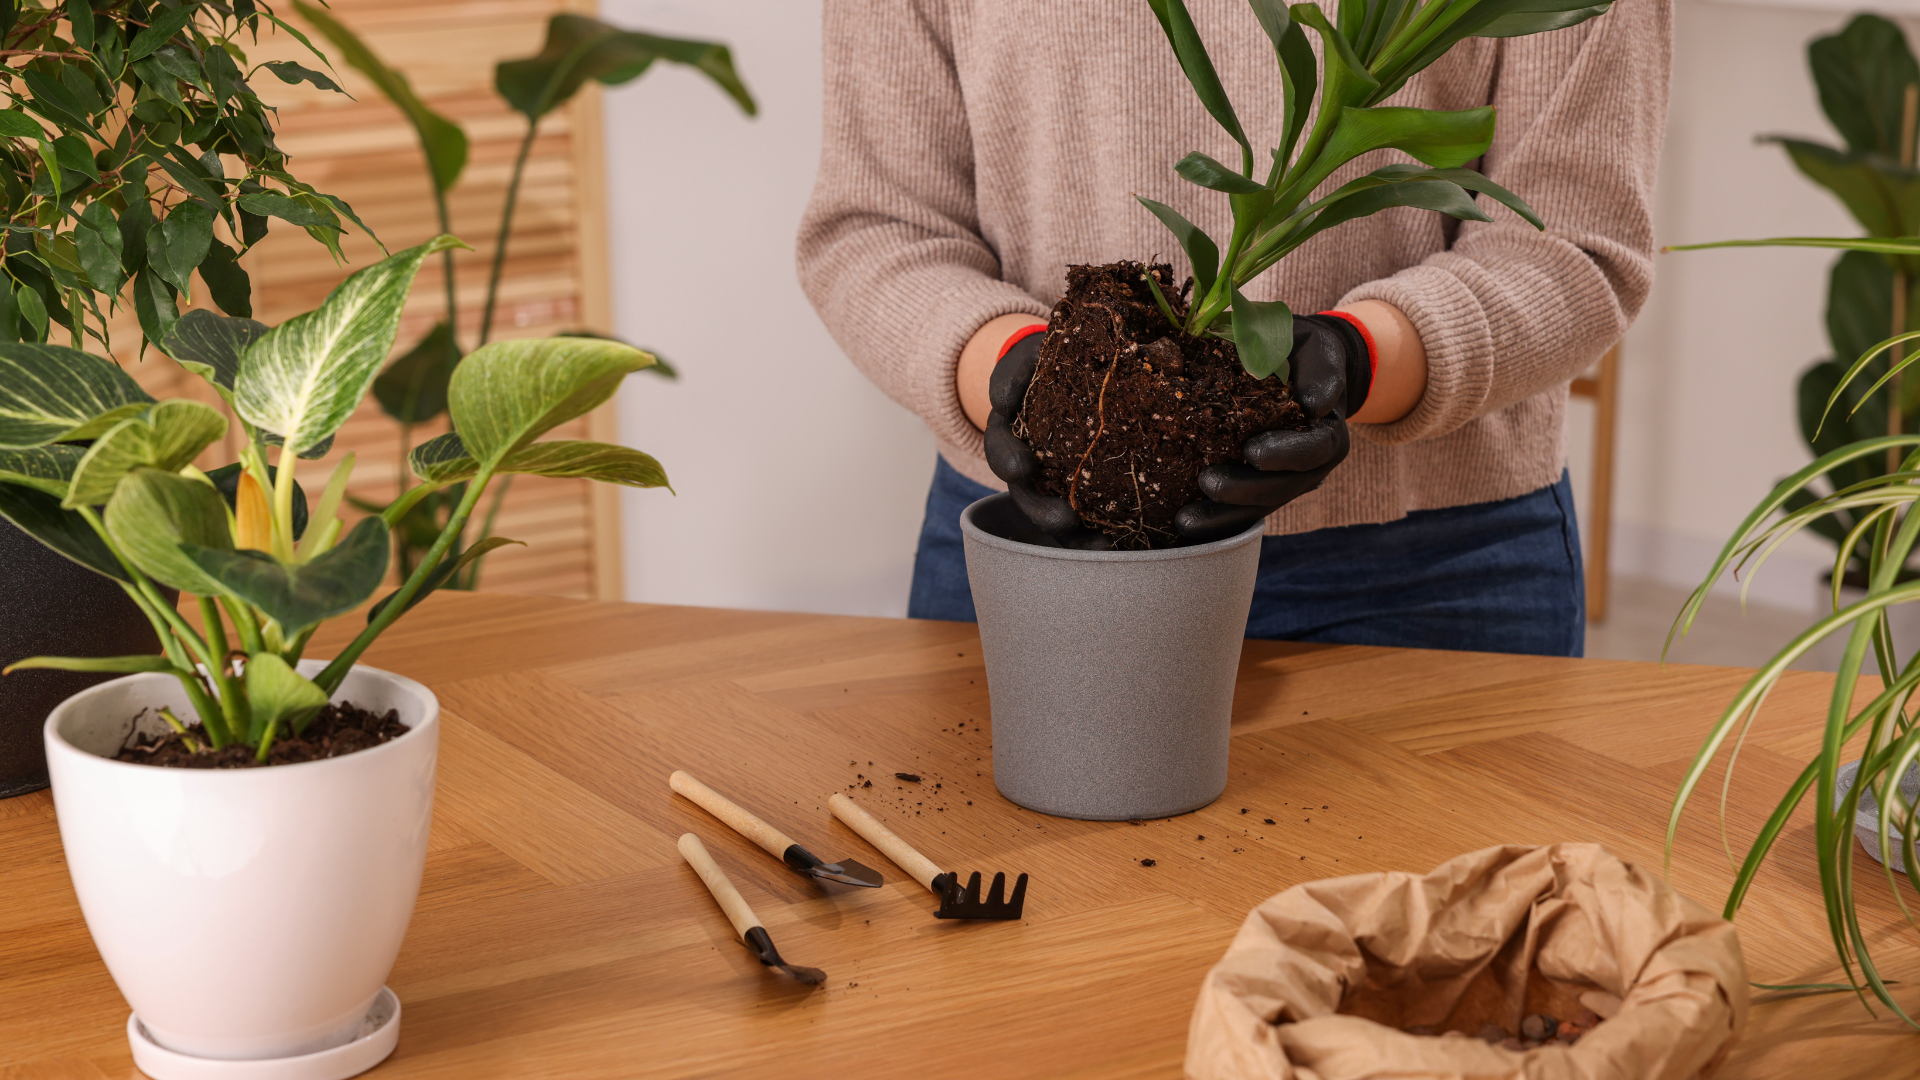 Taun and Maria share some tips for transplanting houseplants. (Canva)...